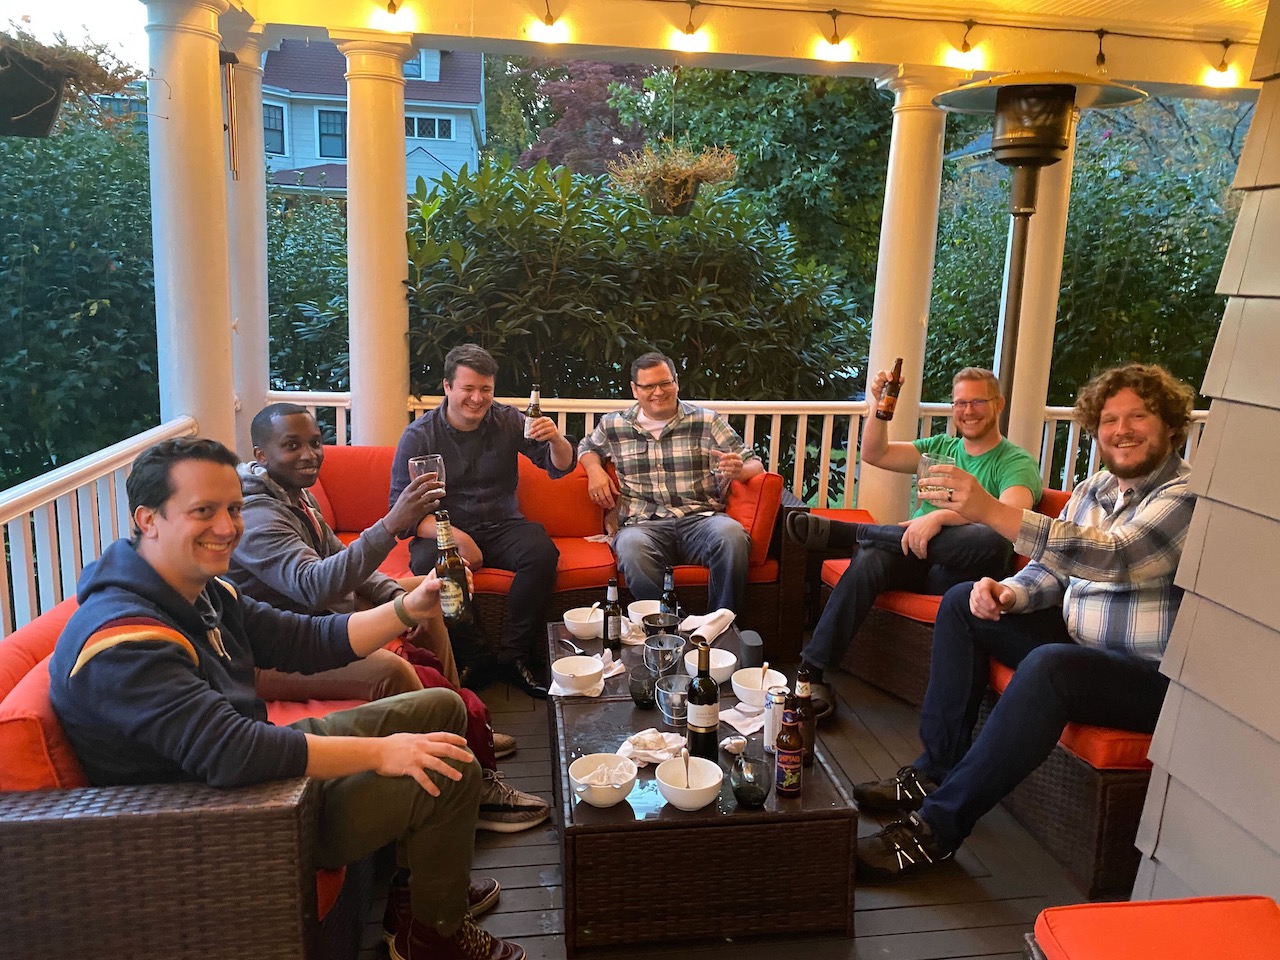 A bunch of dudes sitting on a porch.